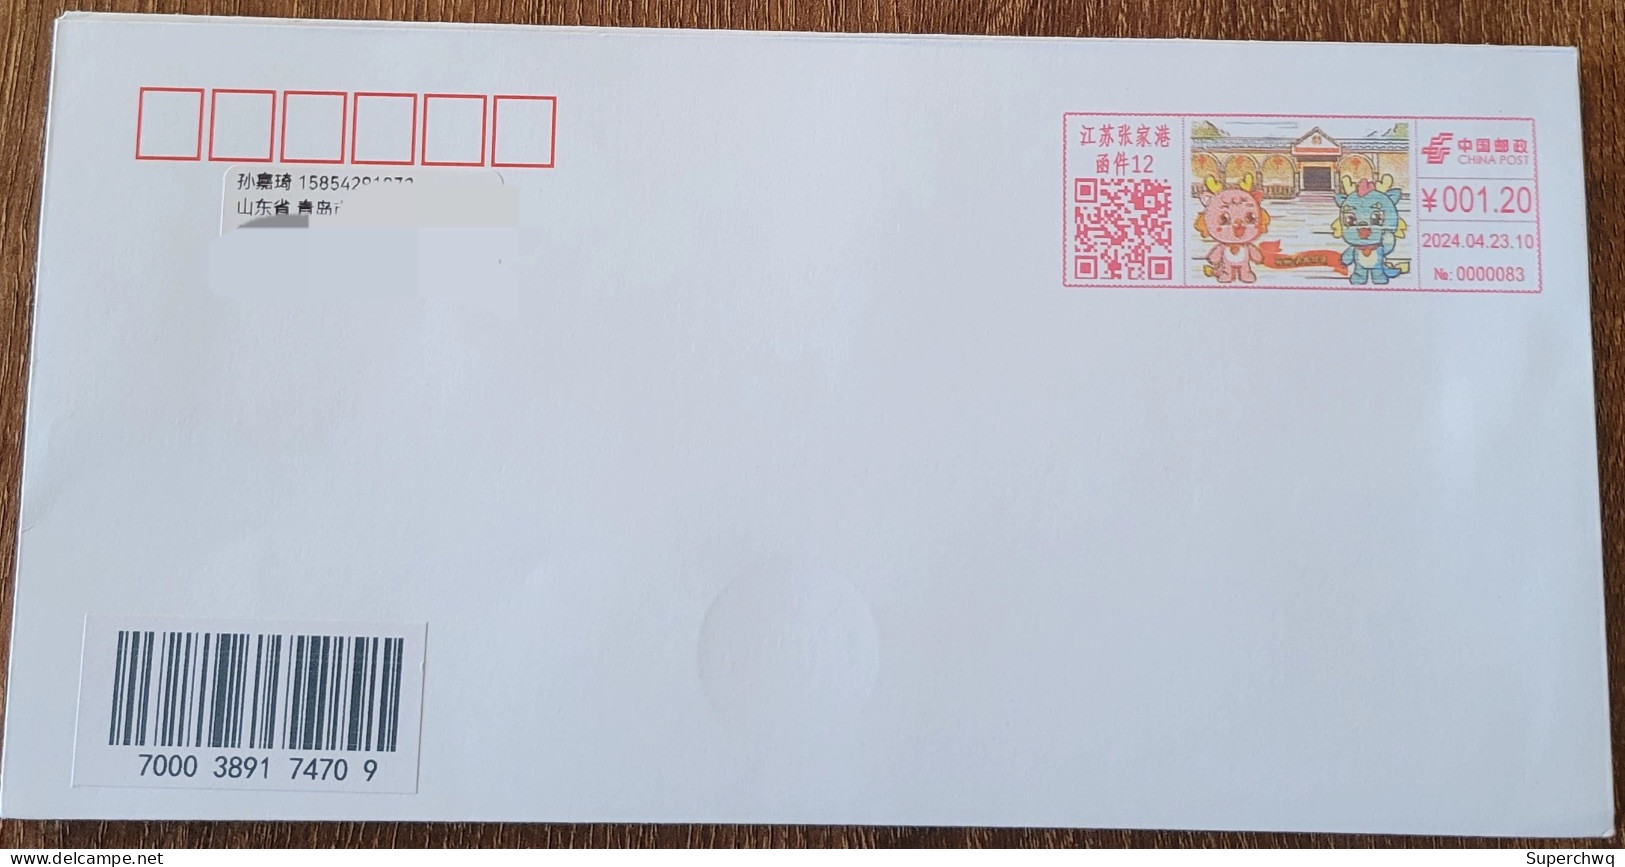 China Cover "Qinglong Community" (Zhangjiagang, Jiangsu) Colored Postage Machine Stamp First Day Actual Delivery Seal - Covers